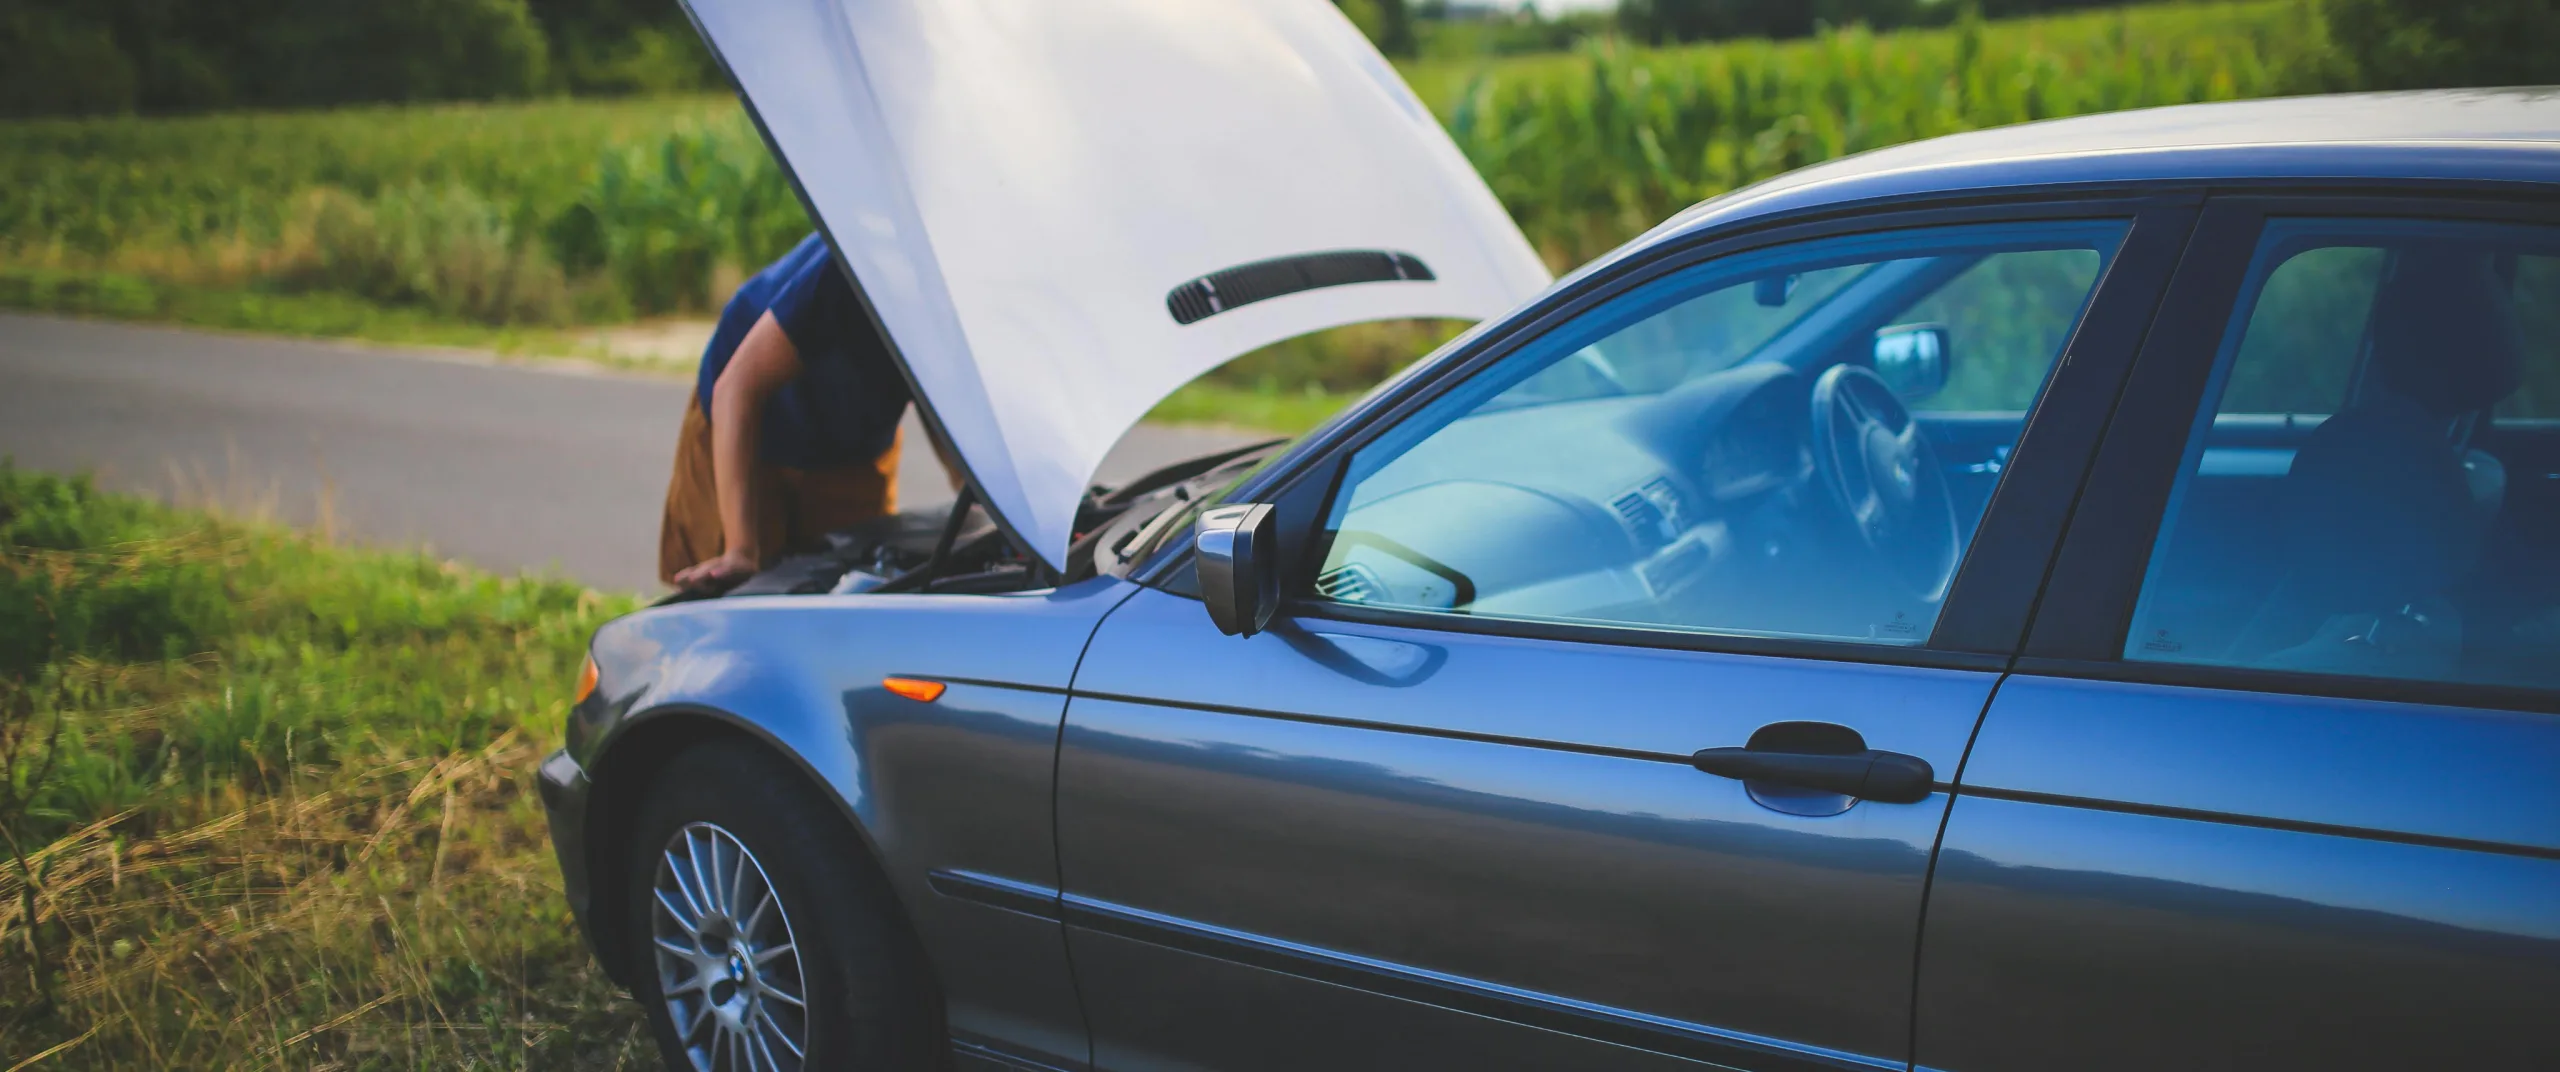 How to avoid used car scams: key tips for car buyers